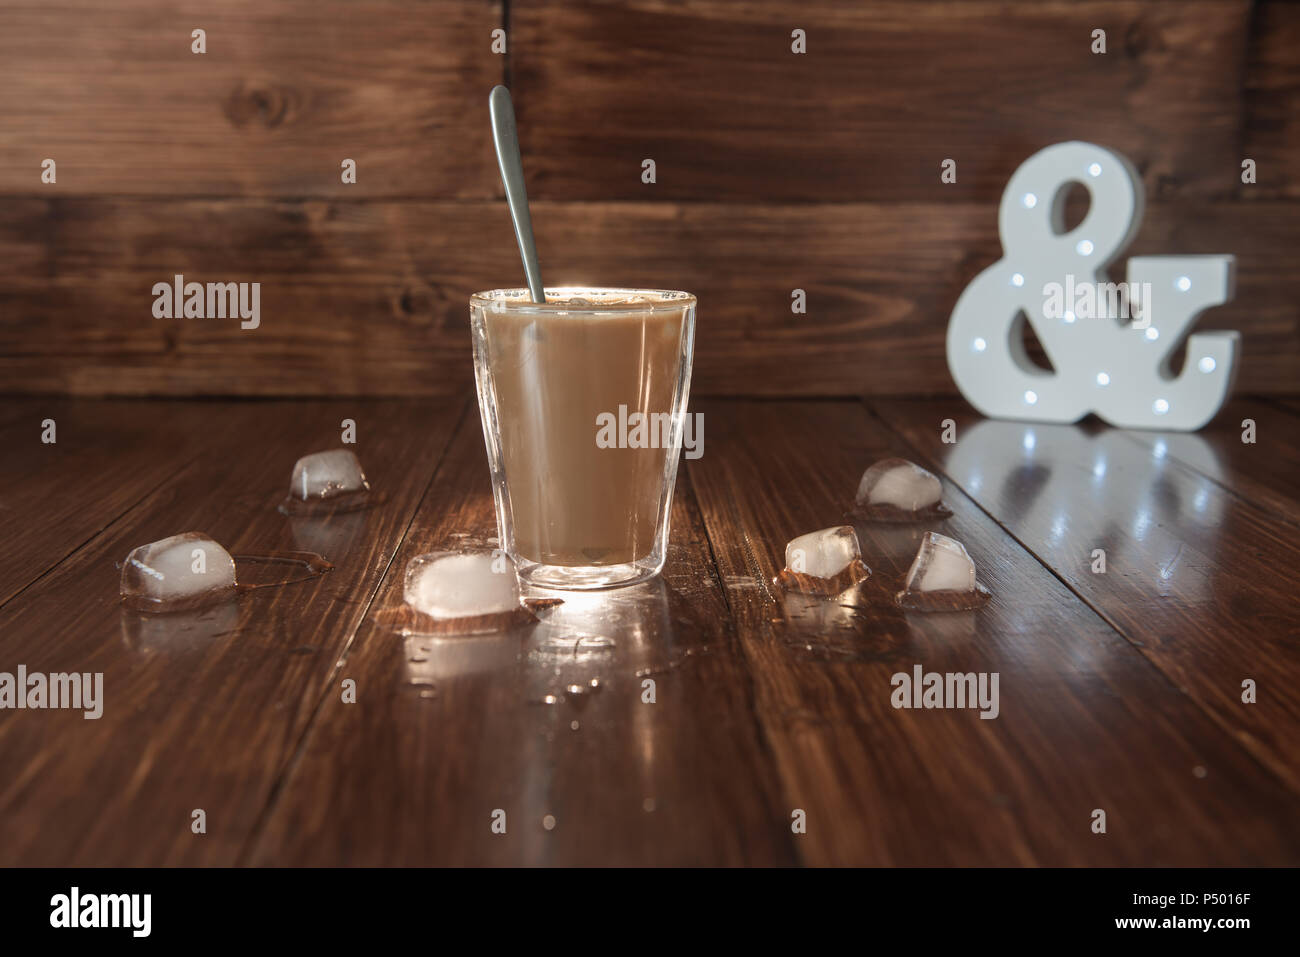 Iced coffee with ice on table Stock Photo